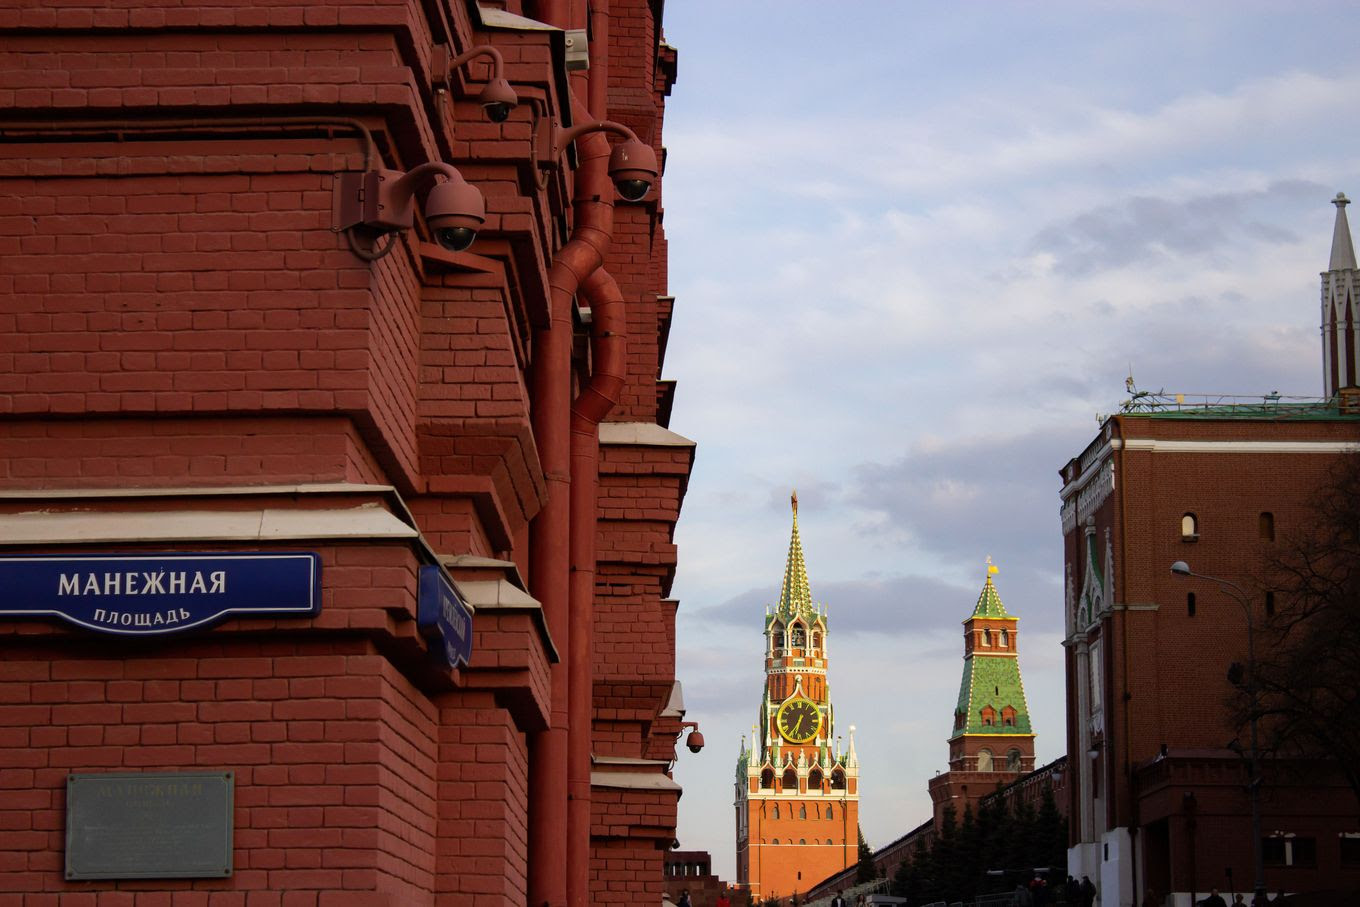 Surveillance cameras on a wall of the State Historical Museum near Red Square in Moscow in April. (Vlad Karkov/SOPA Images/LightRocket/Getty Images)